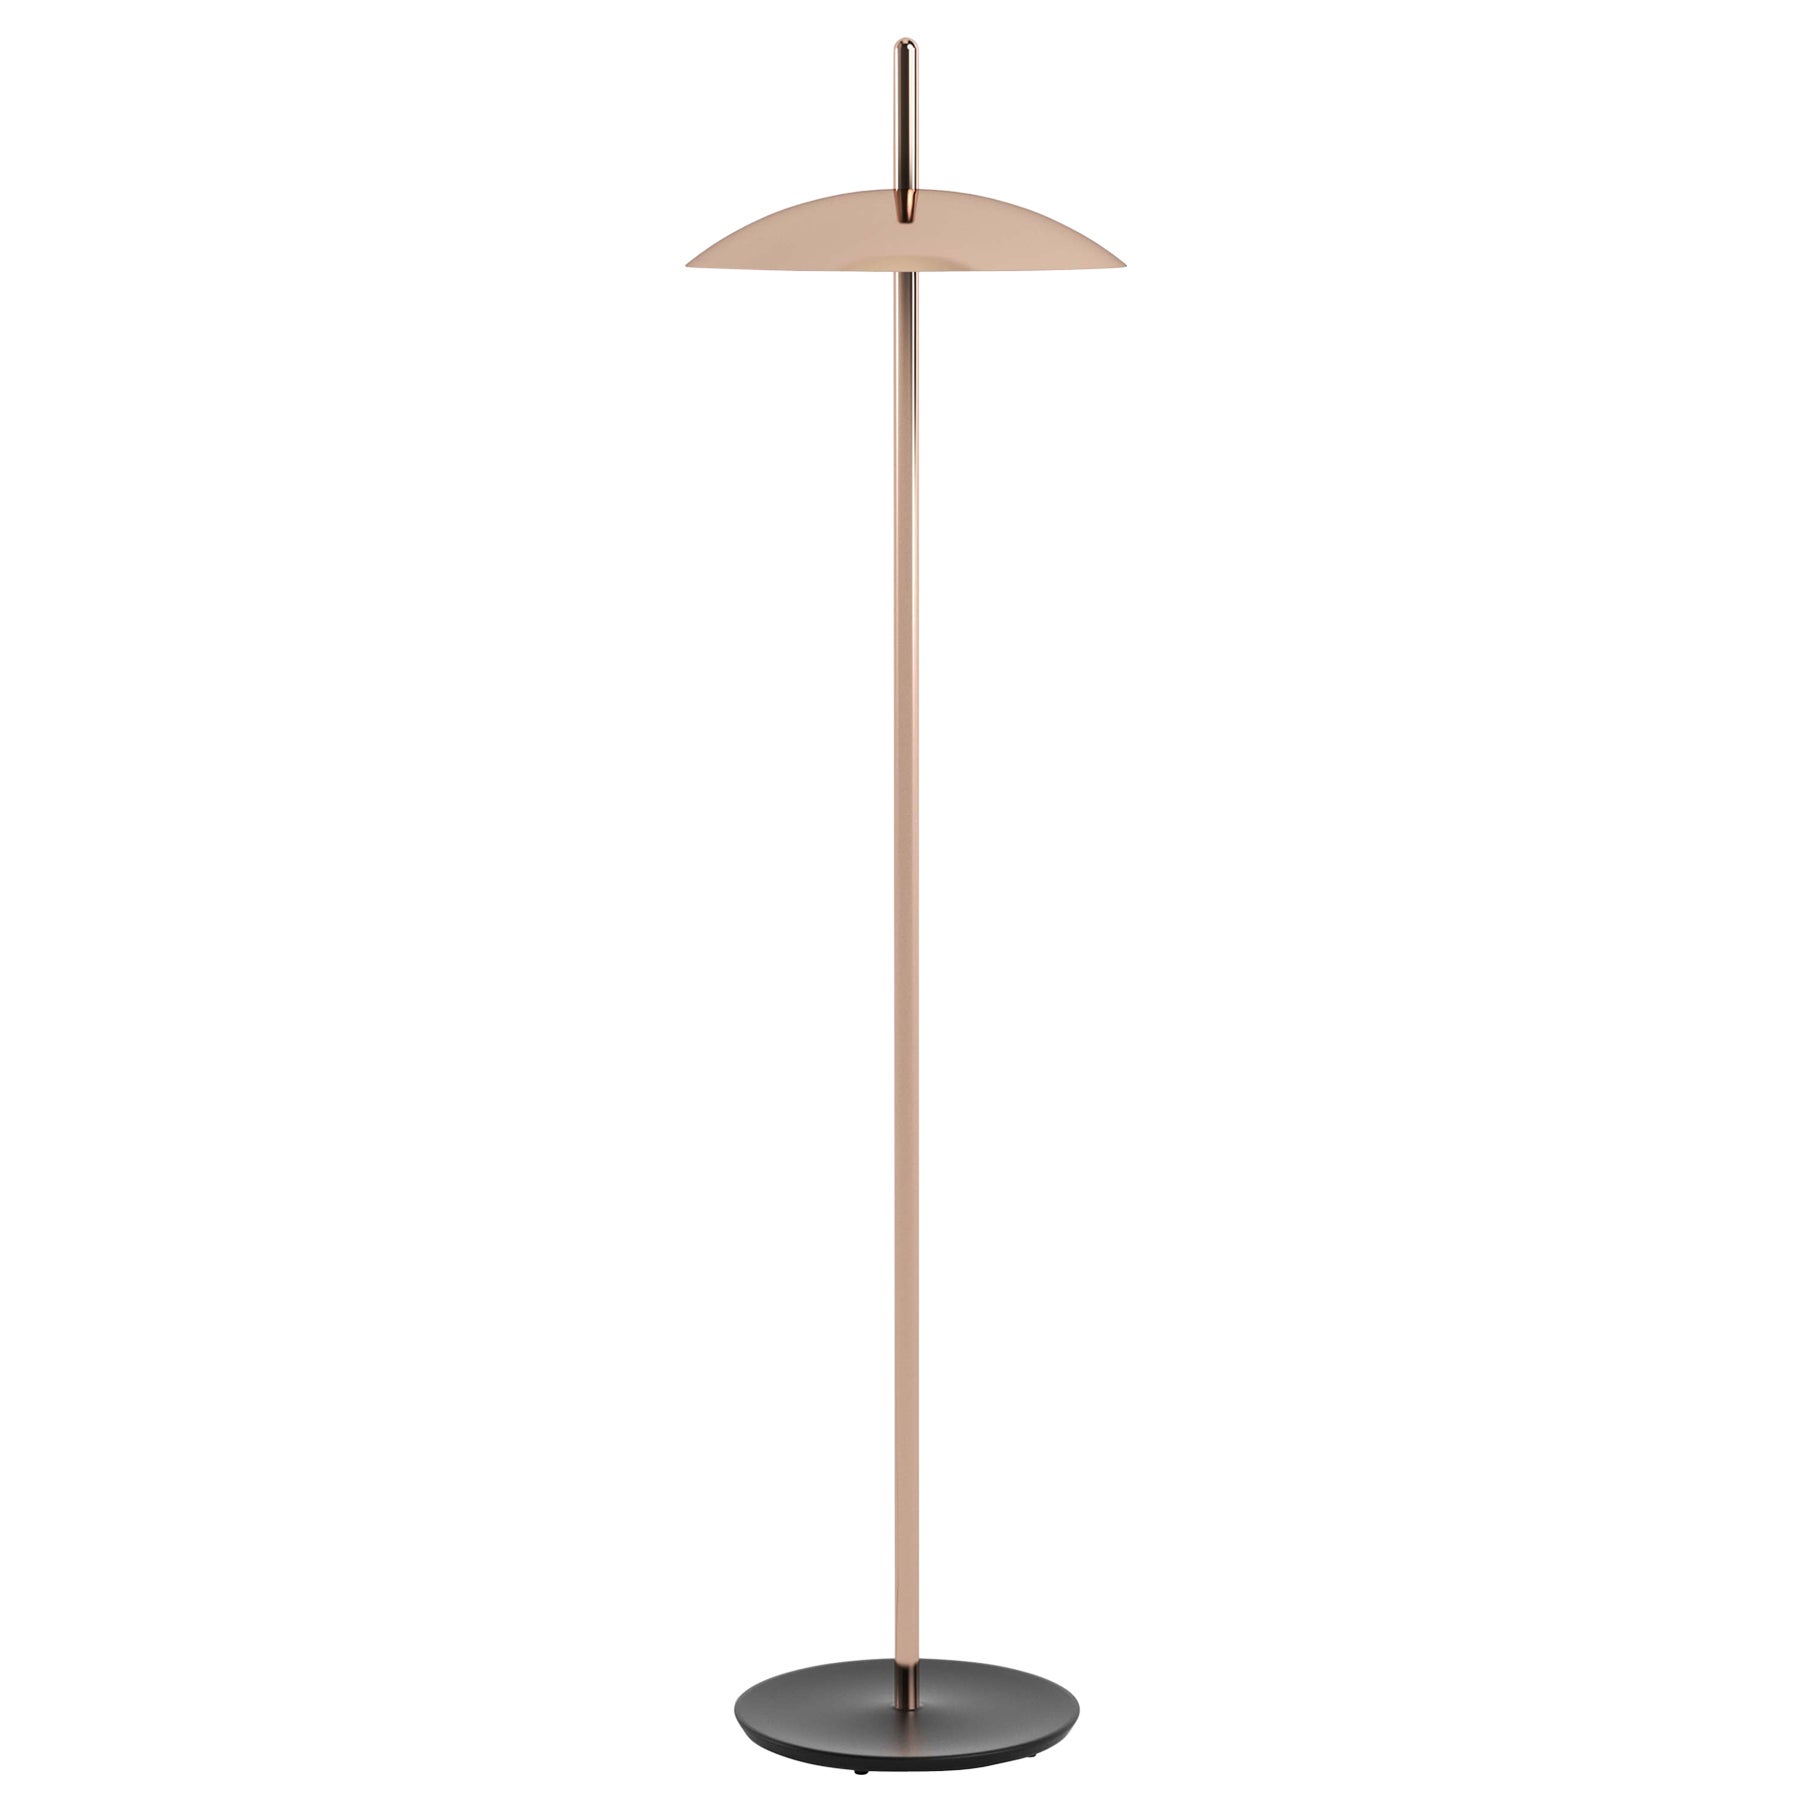 Copper Signal Floor Lamp from Souda, Made to Order